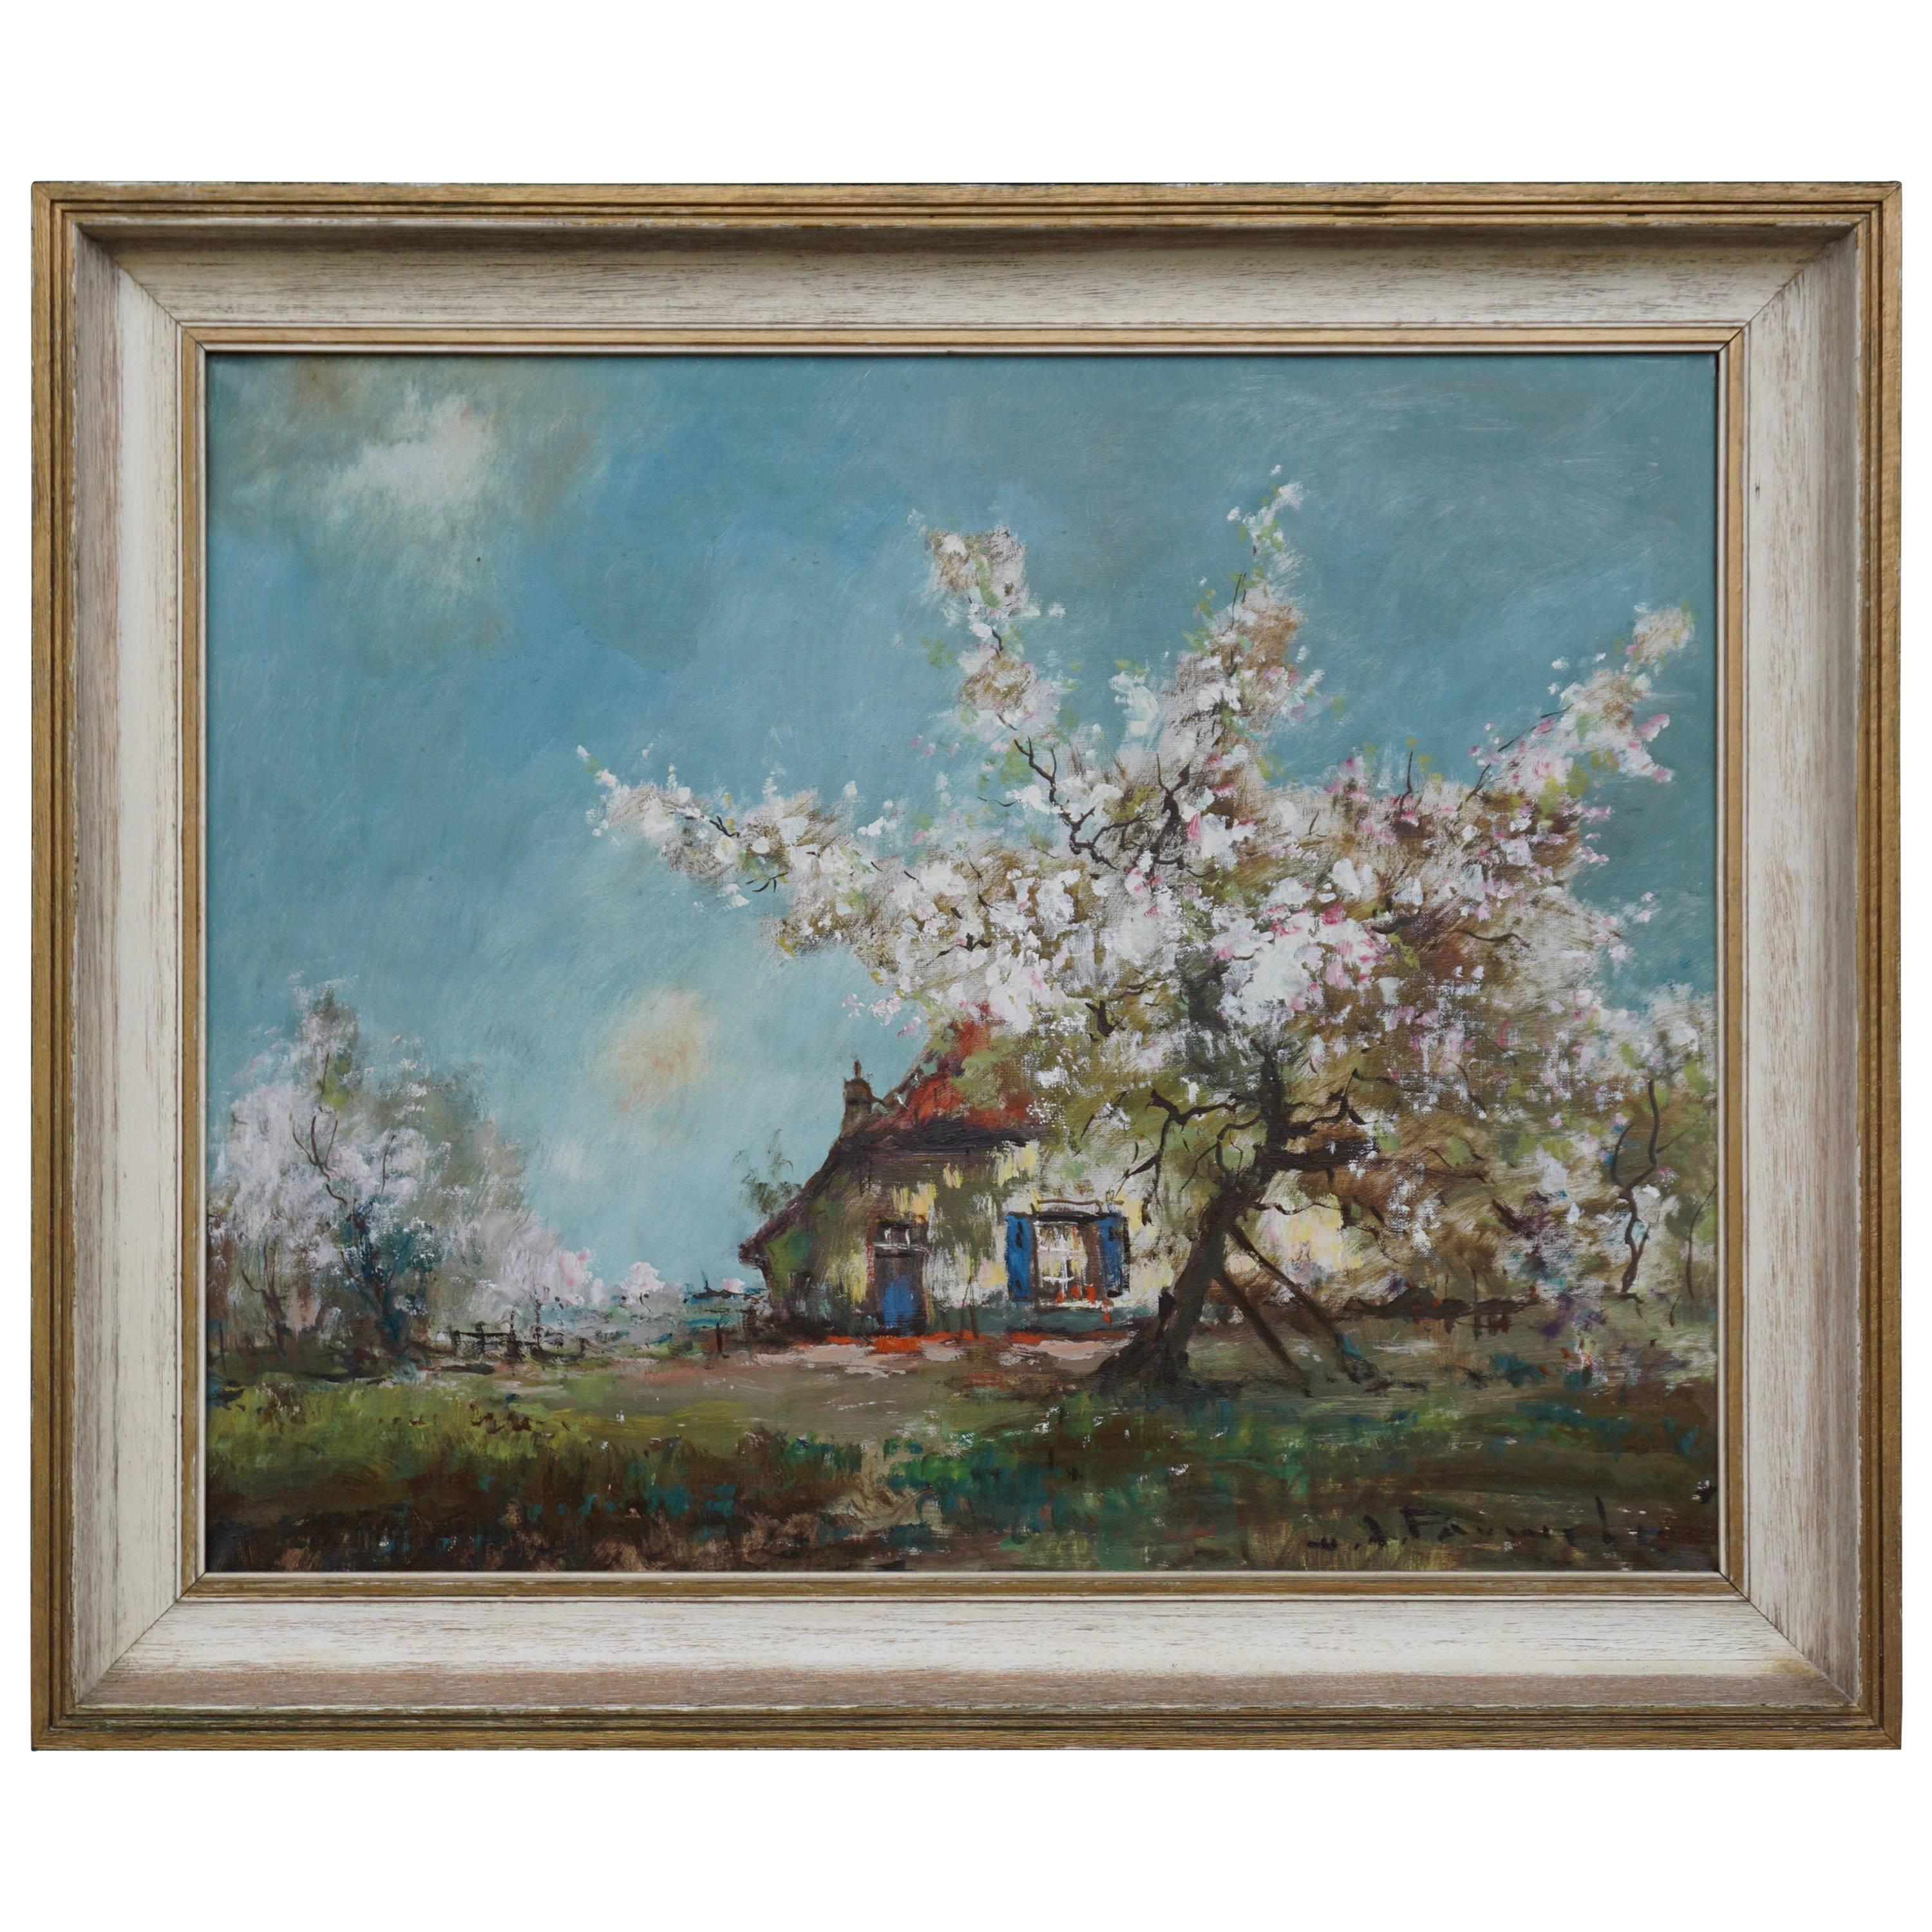 "The Spring Blossom" Painting by Pauwels